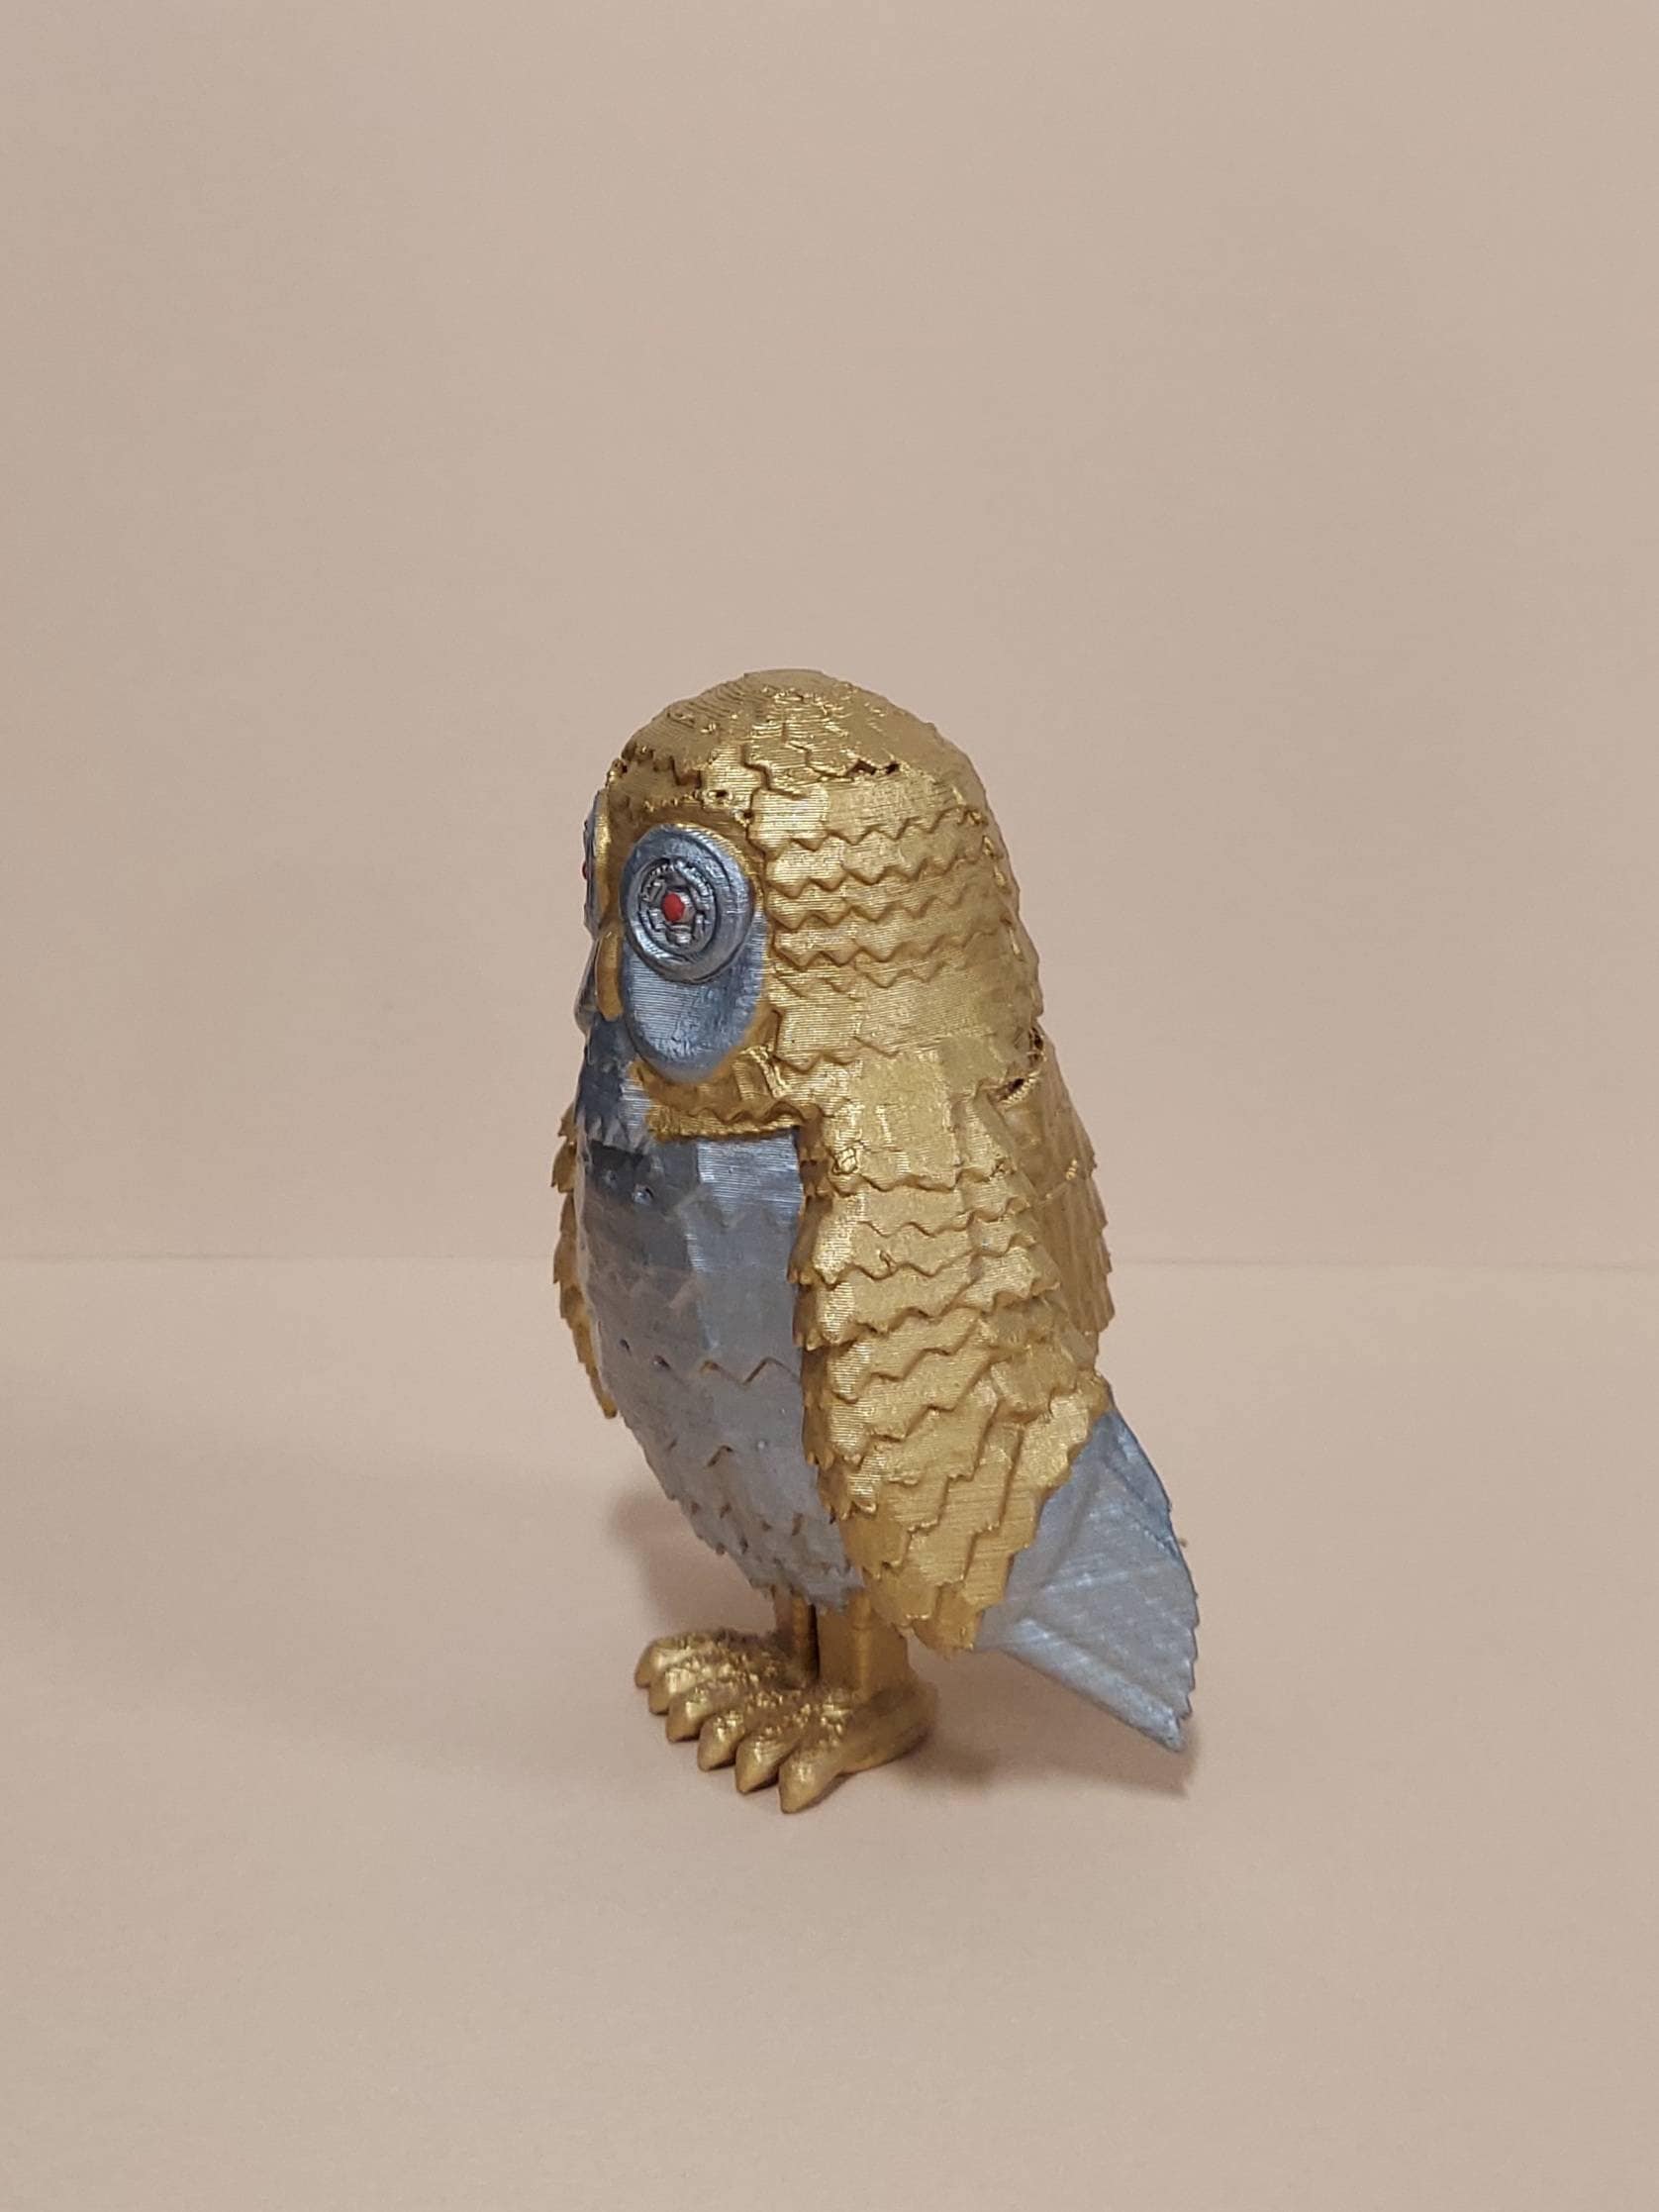 Get Your Own Life-Size CLASH OF THE TITANS Bubo the Owl Figure - Nerdist